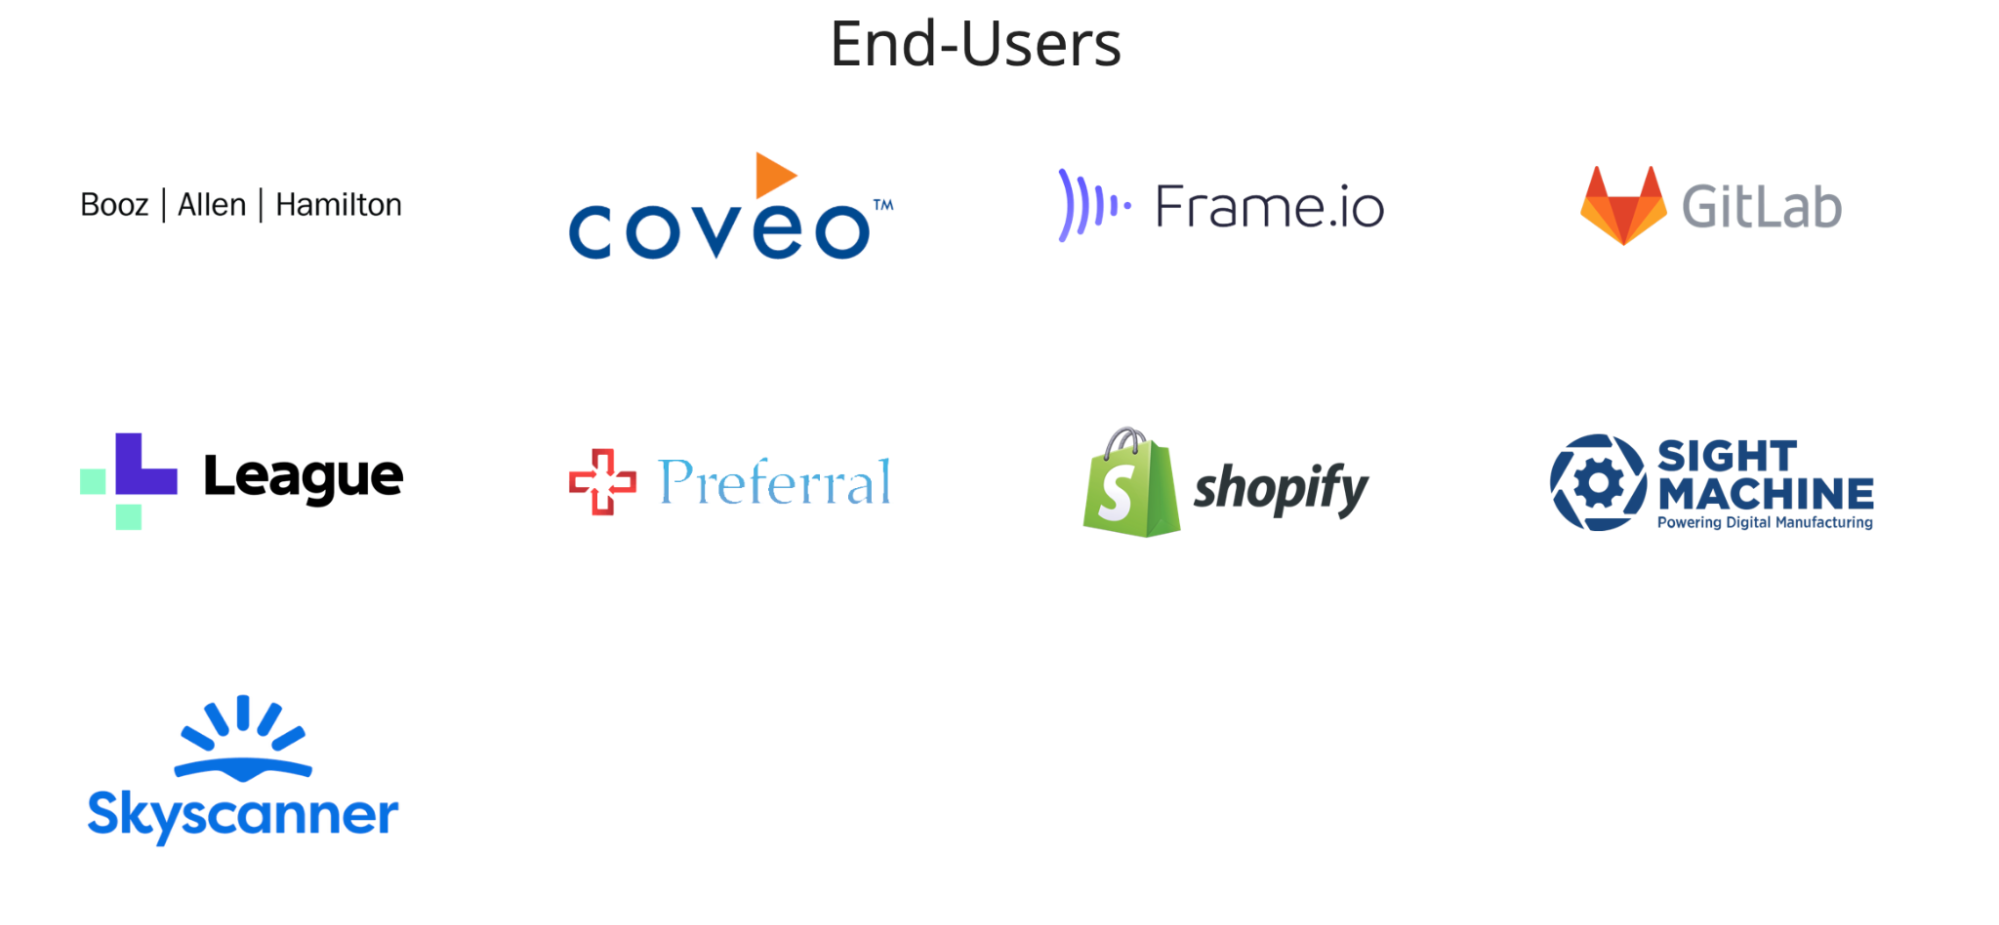 Falco users include shopify, skyscanner, Frame.io and GitLab